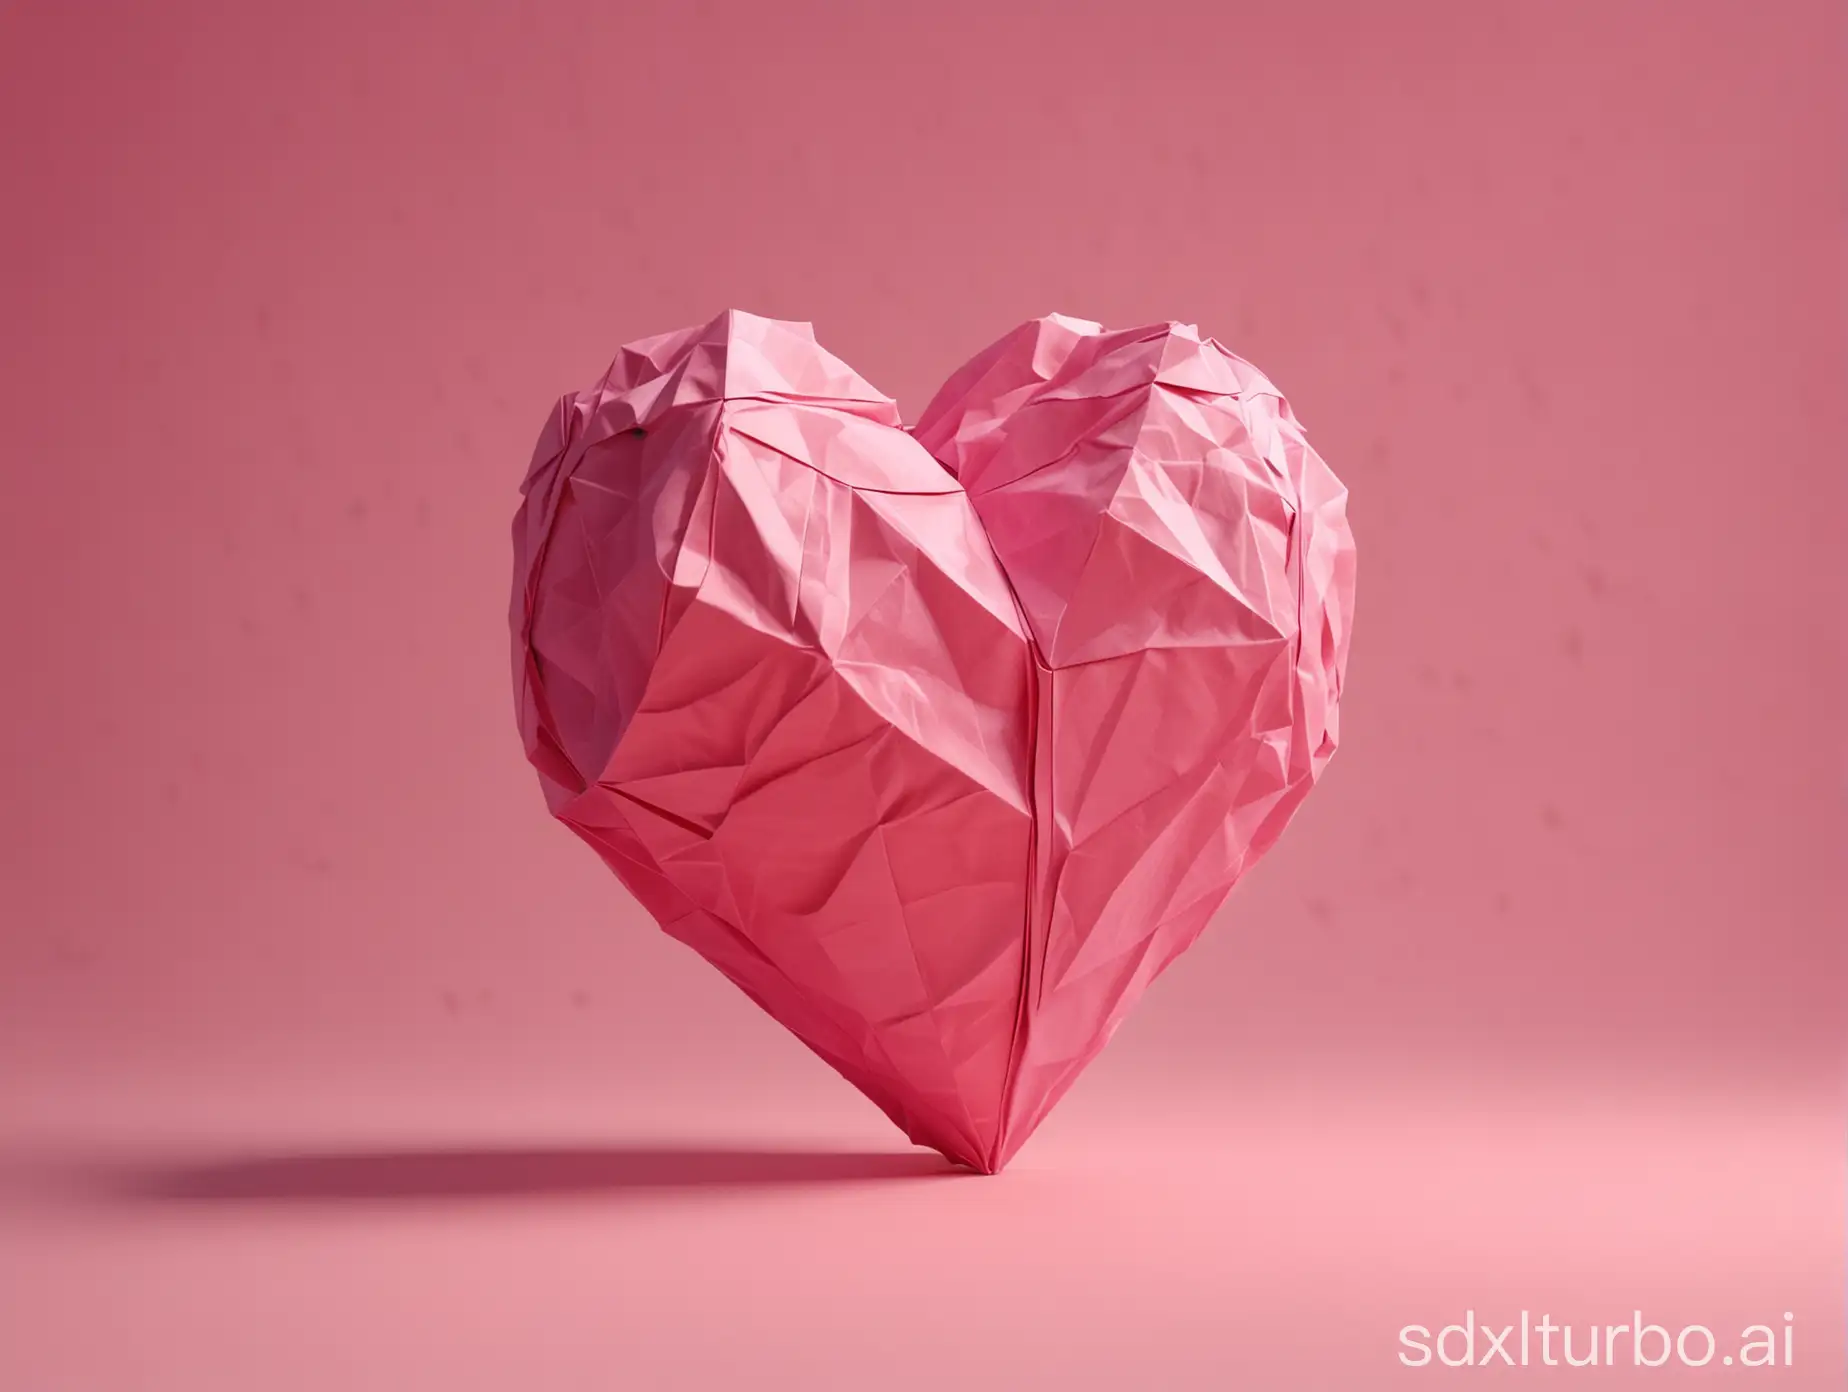 Luminous-Origami-Heart-Sculpture-on-Ethereal-Pink-Background